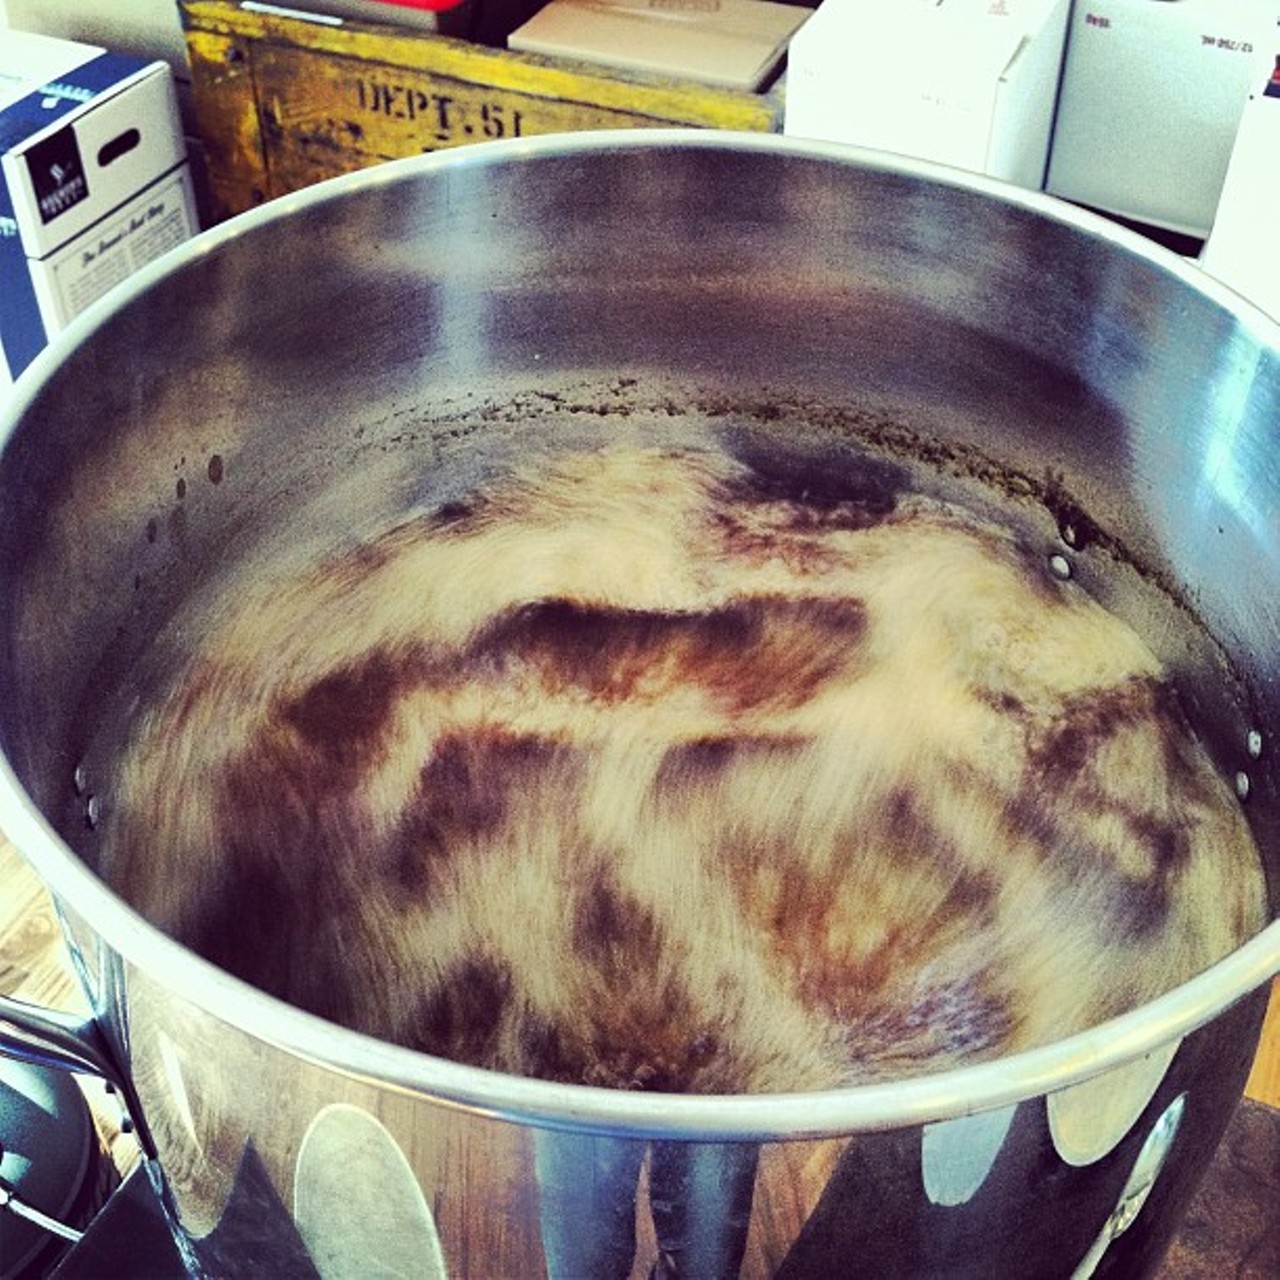 Drain off the liquid and drop the unfermented beer into some water for boiling.